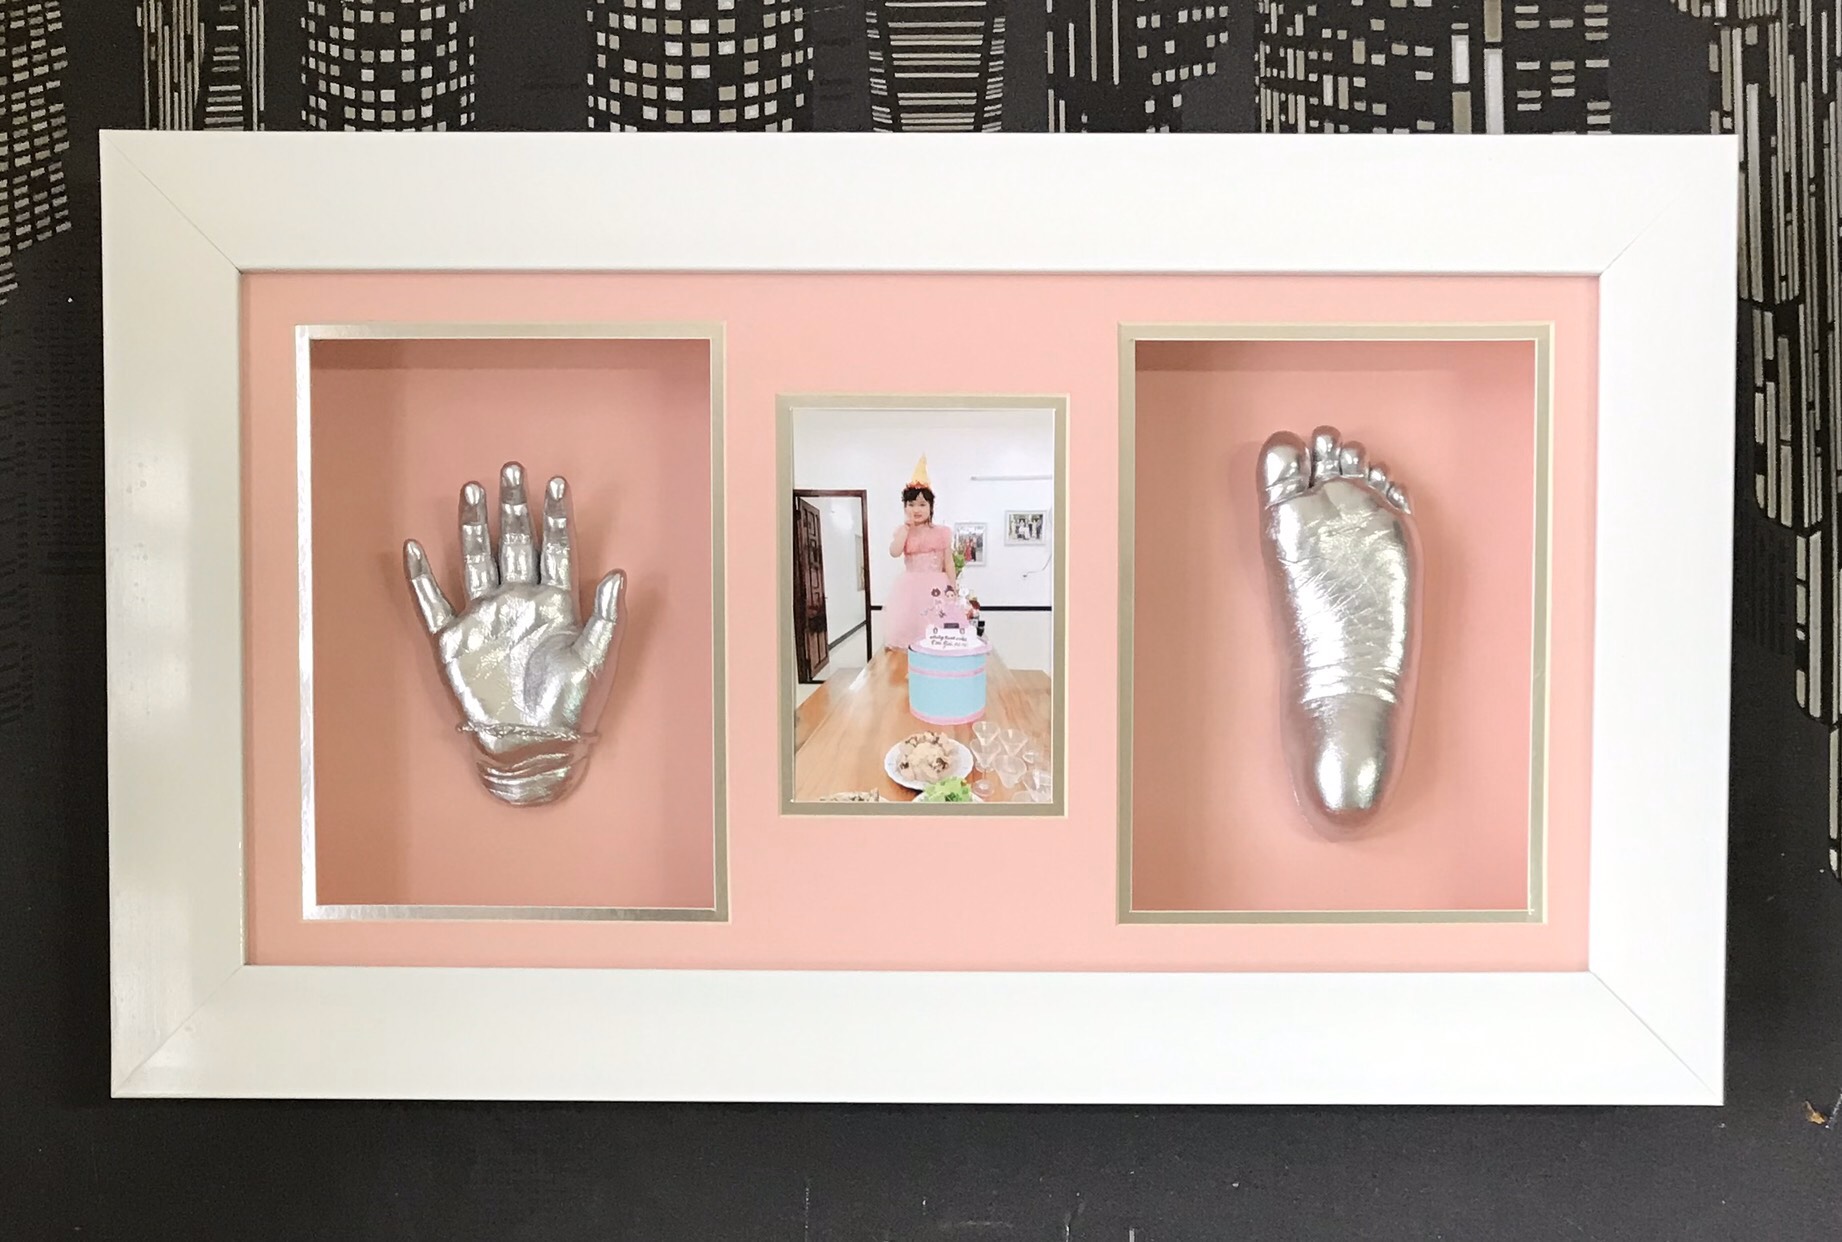 Baby hand and feet casting 26x50cm